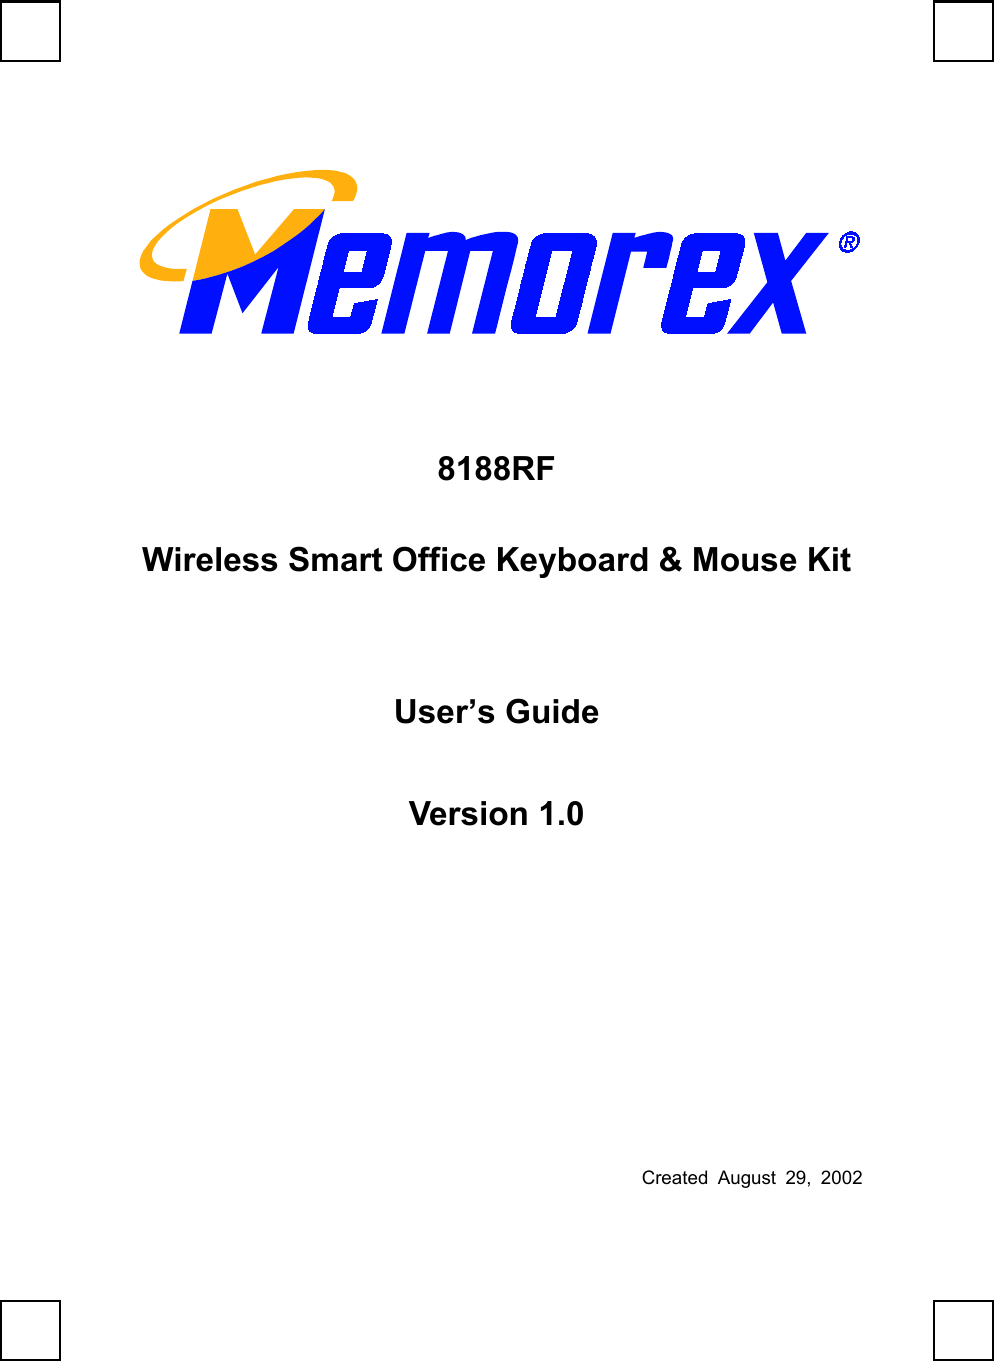 8188RFWireless Smart Office Keyboard &amp; Mouse KitUser’s GuideVersion 1.0Created August 29, 2002